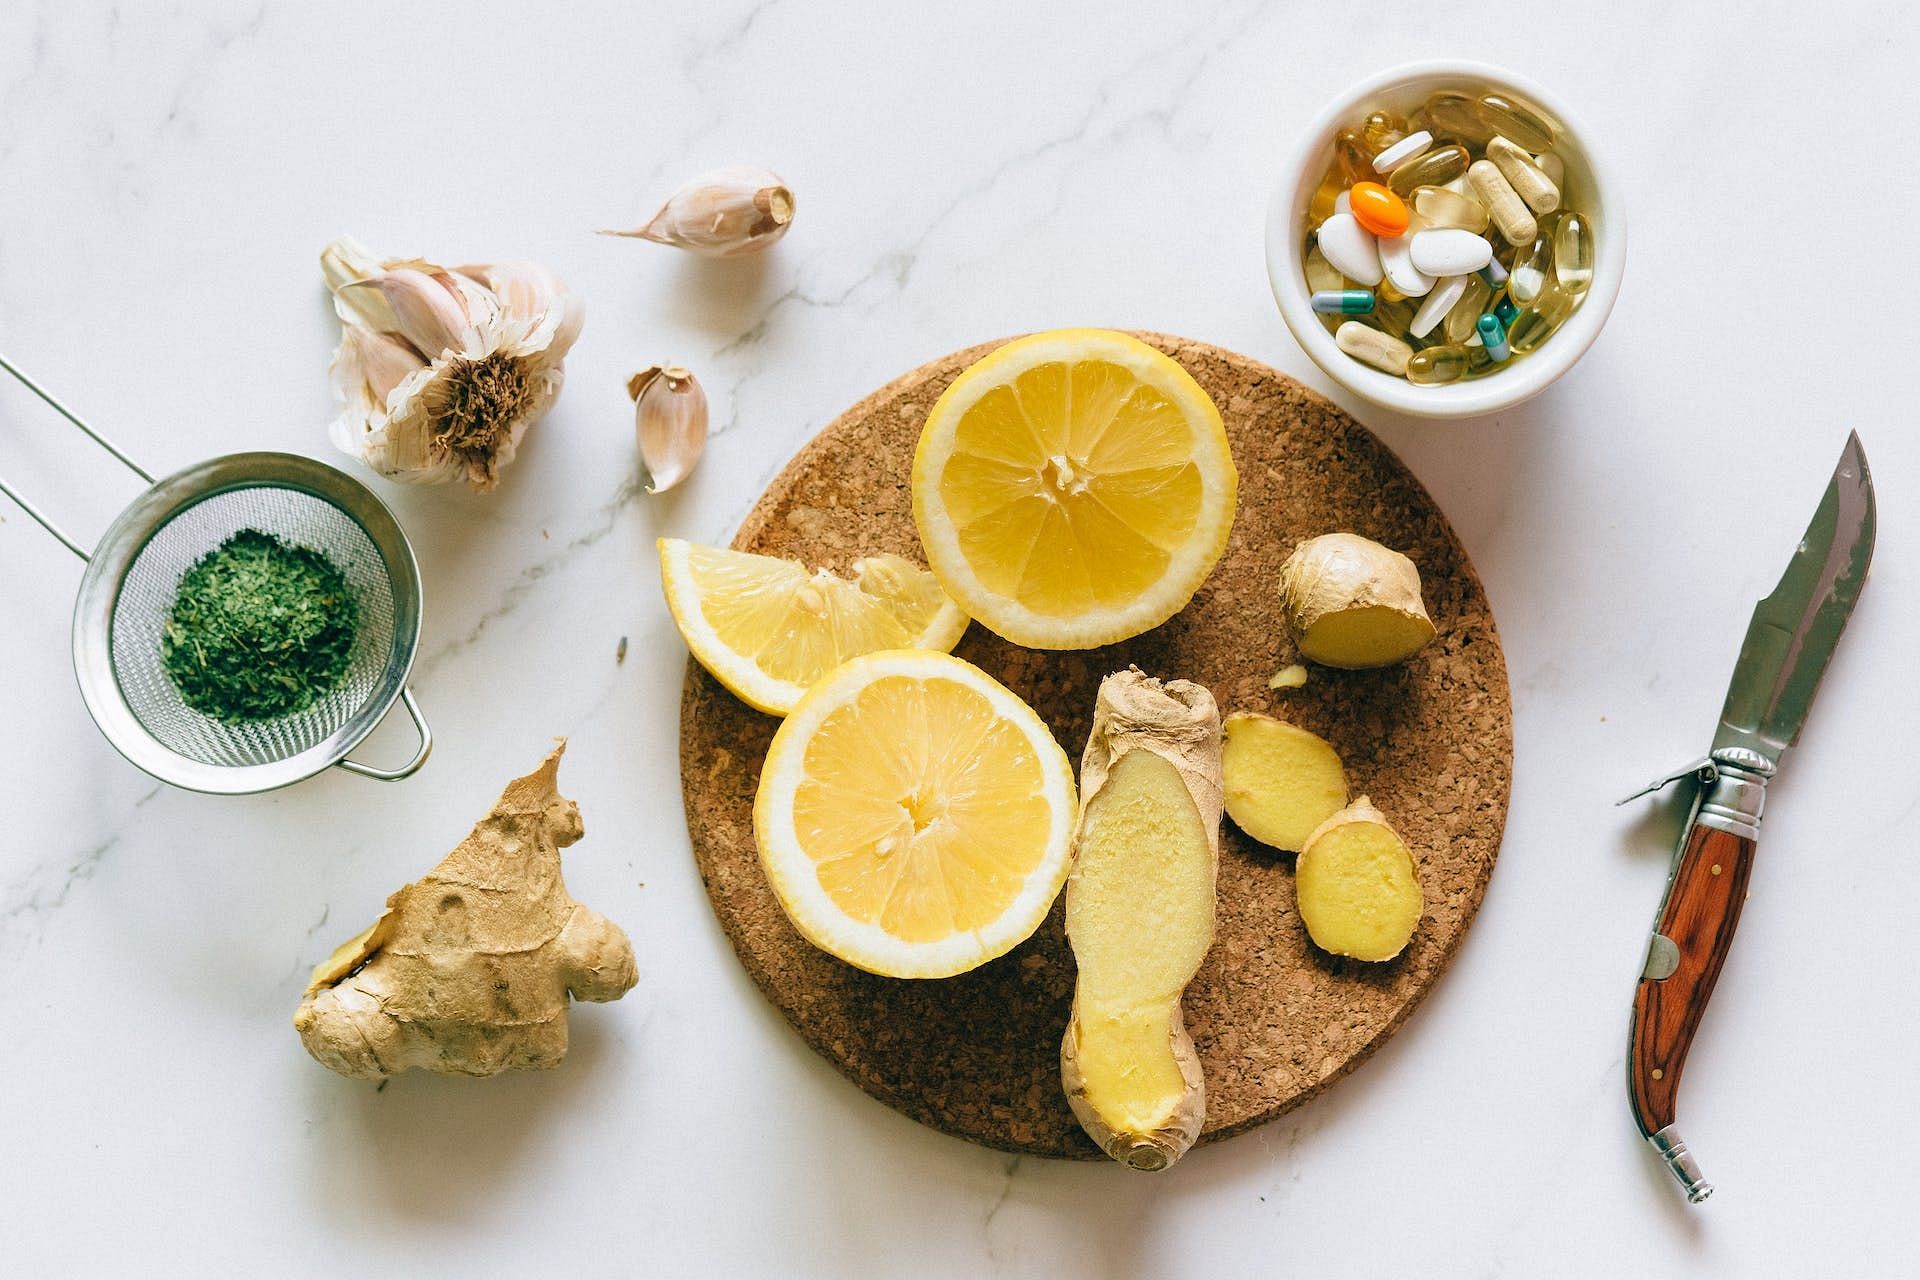 Ginger ale can cure an upset stomach (Image via Pexels/Nataliya Vaitkevich)